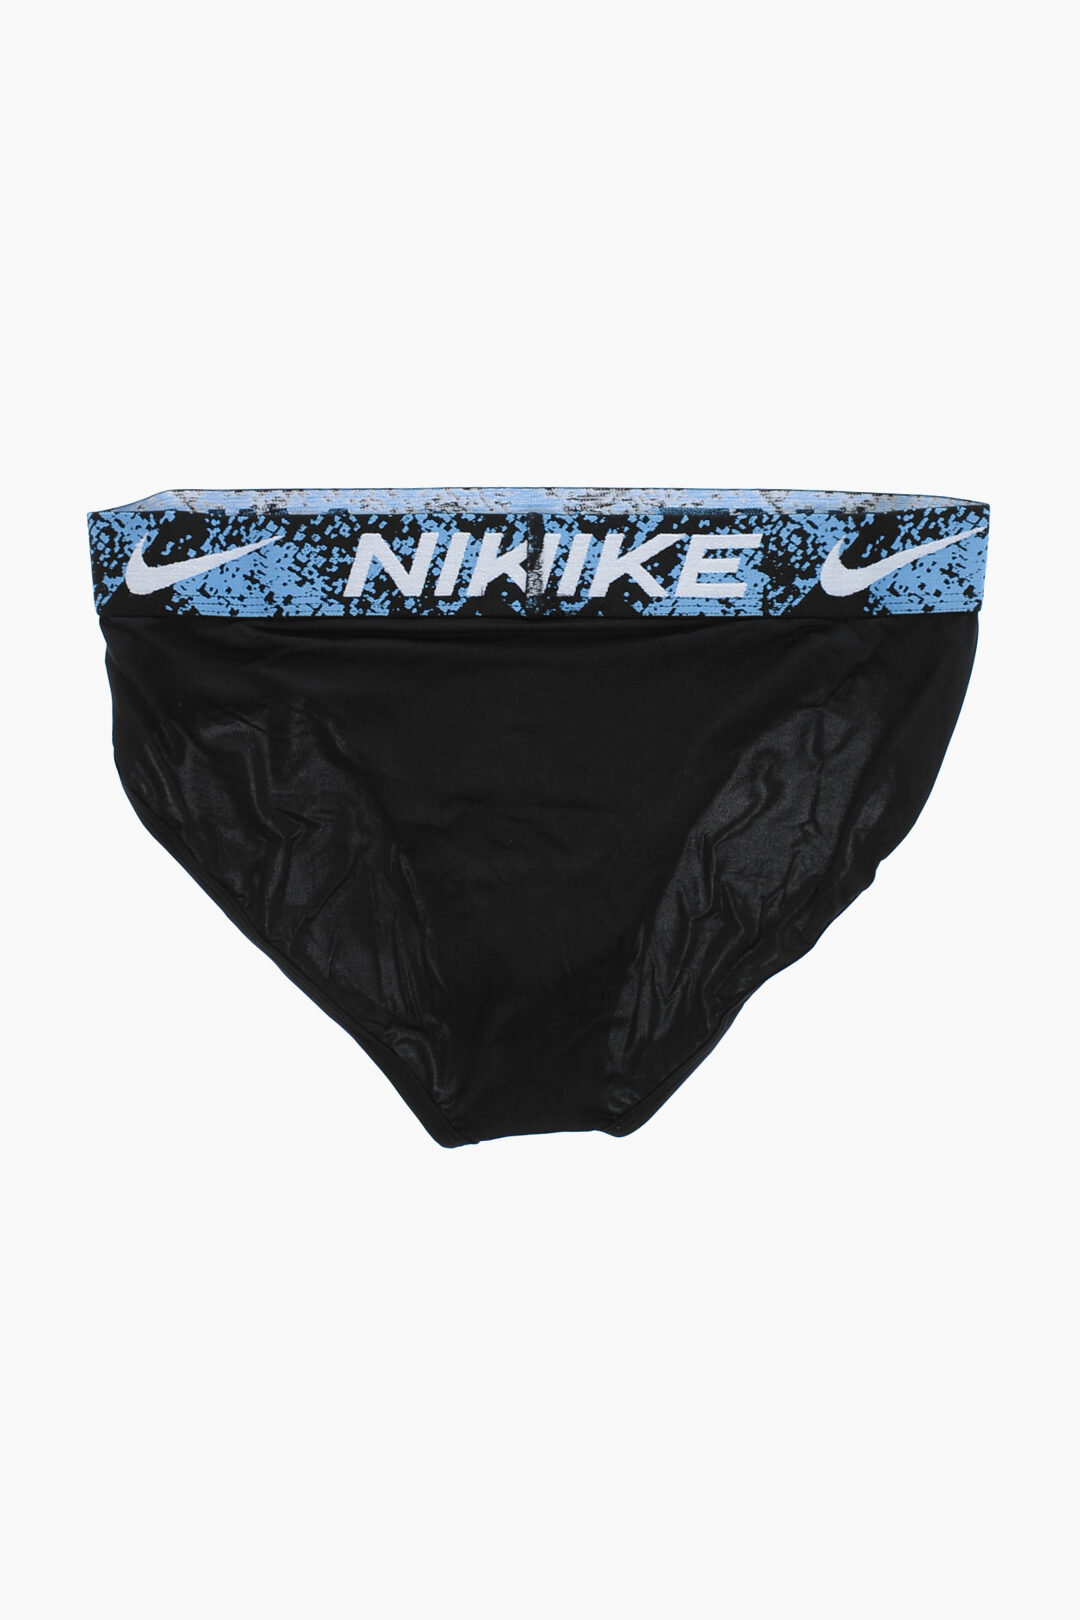 Nike Set of 3 Dri-Fit Briefs with Logoed Elastic Band men - Glamood Outlet